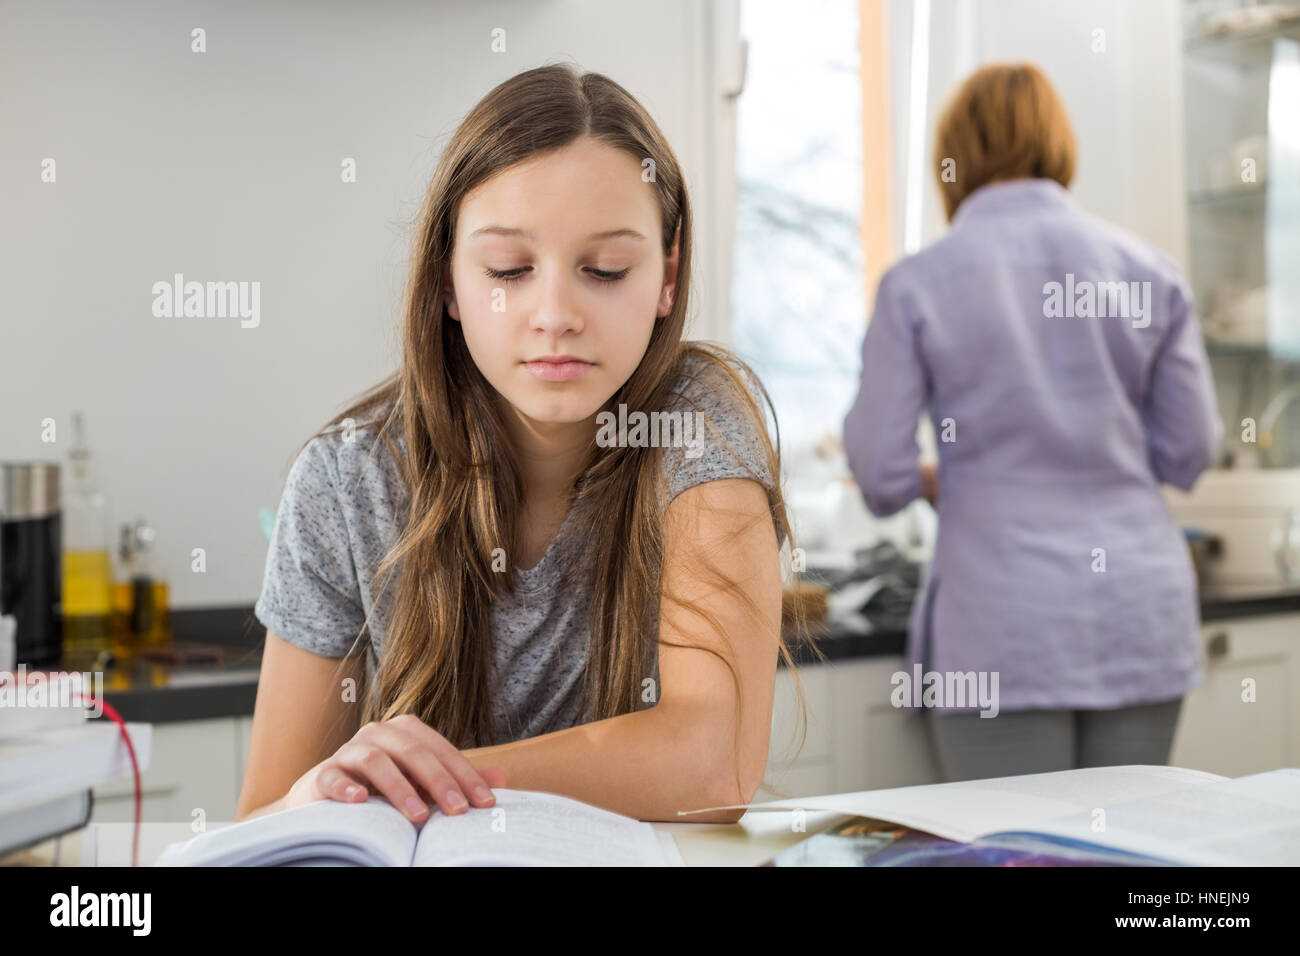 Girl studying at table with mother standing in background Banque D'Images